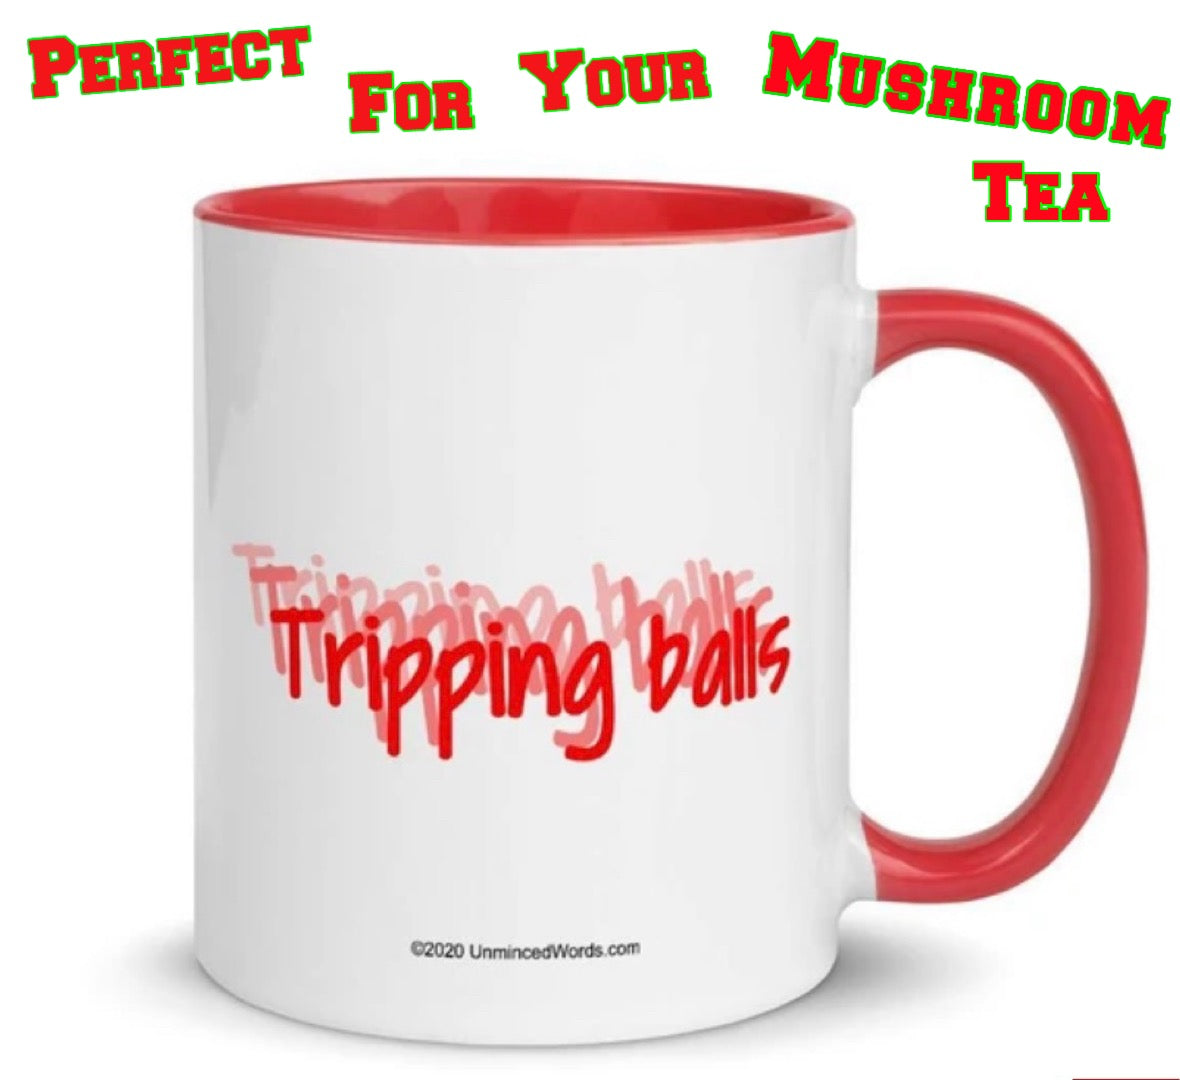 Tripping balls? We made this design for you